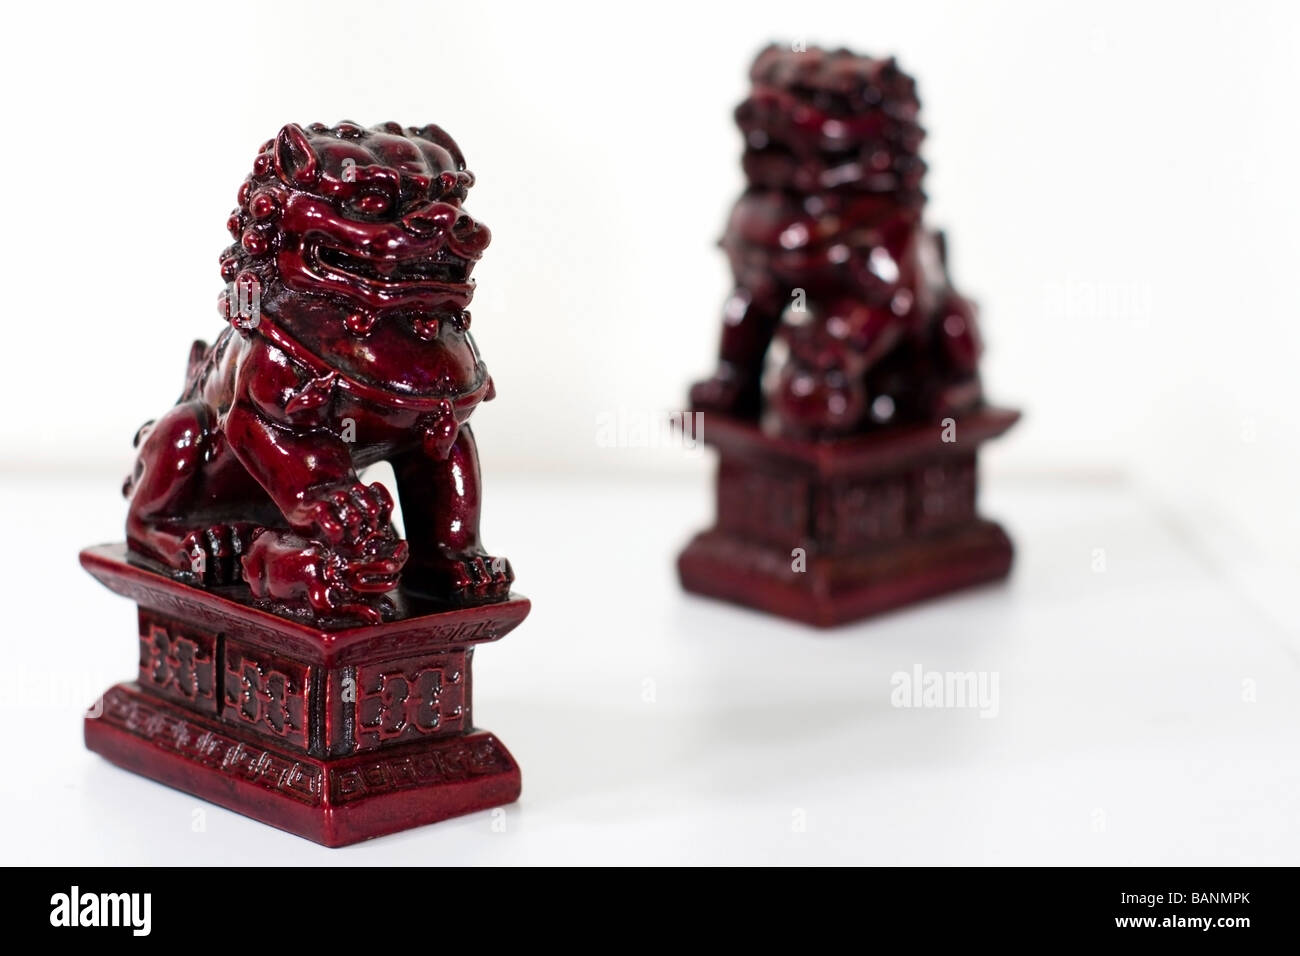 Chinese lions; Figurines of lions believed to have mythic protective powers in Chinese mythology Stock Photo